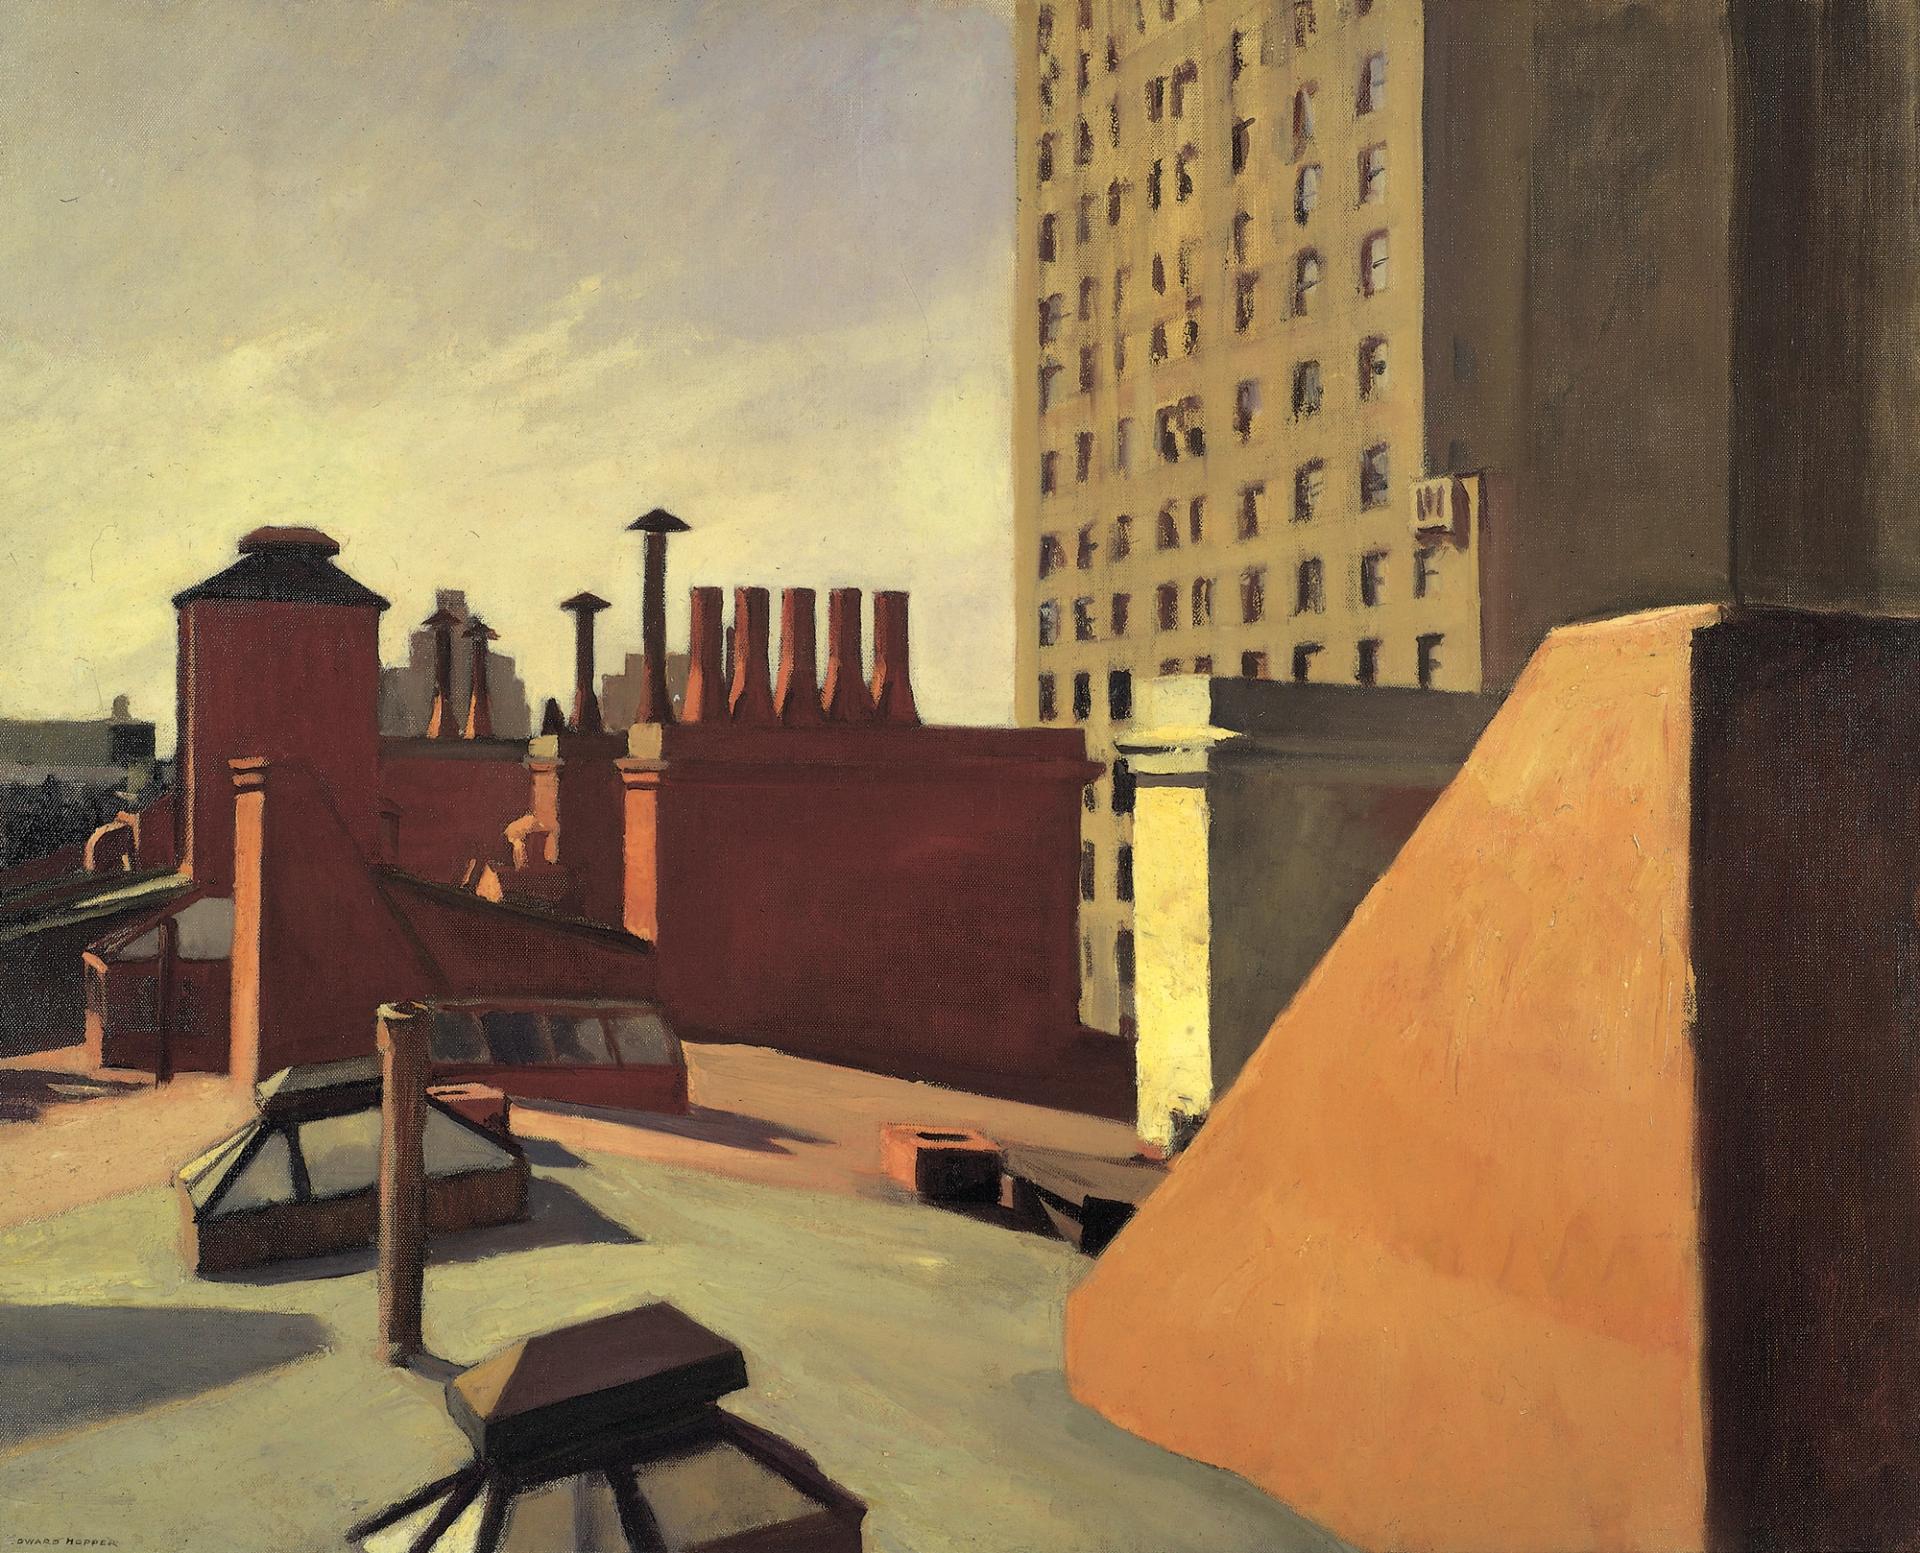 Edward Hopper, City Roofs (1932). © 2022 Heirs of Josephine N. Hopper/Licensed by Artists Rights Society (ARS), New York.